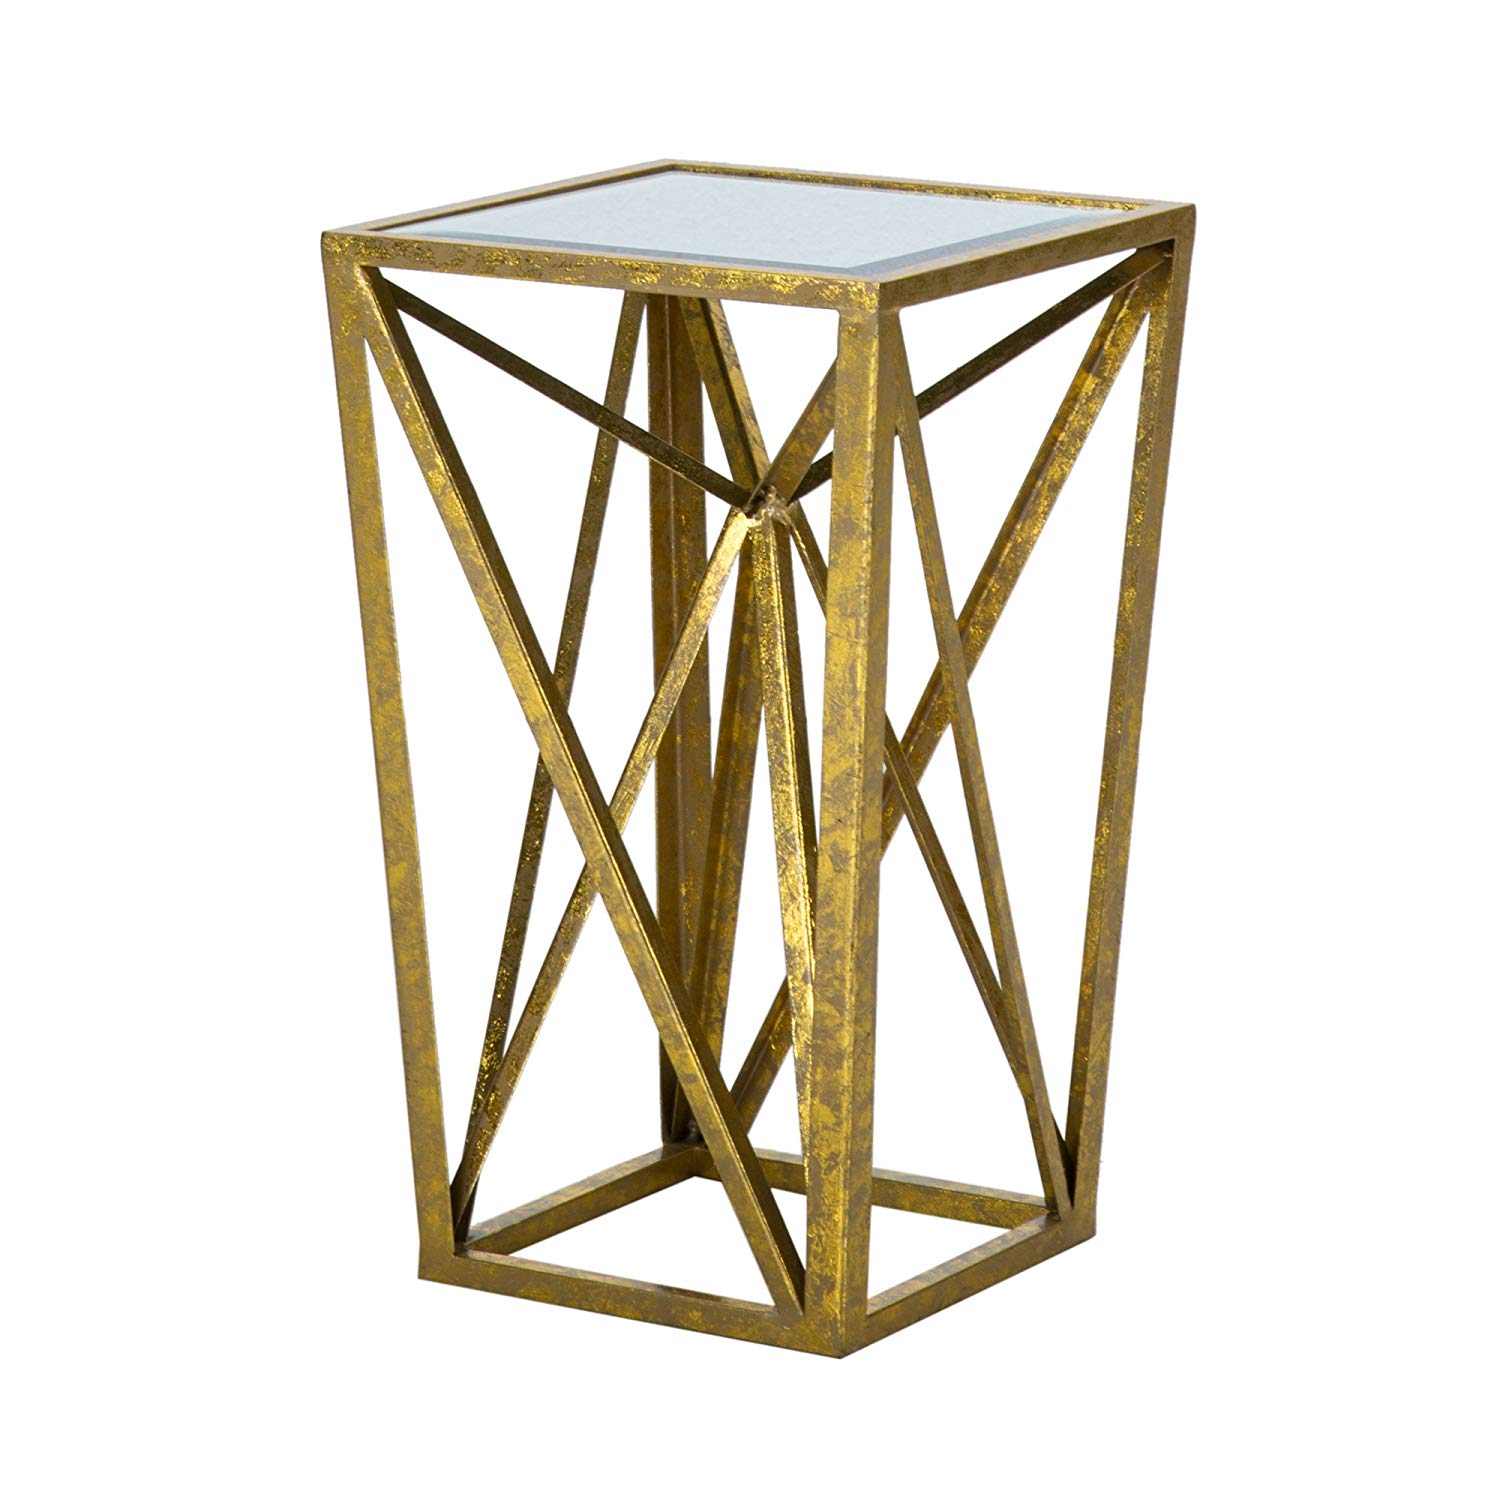 madison park zee accent tables mirror glass metal furniture side table gold angular design modern style end piece top hollow round tall mirrored farmhouse drop leaf nautical wall